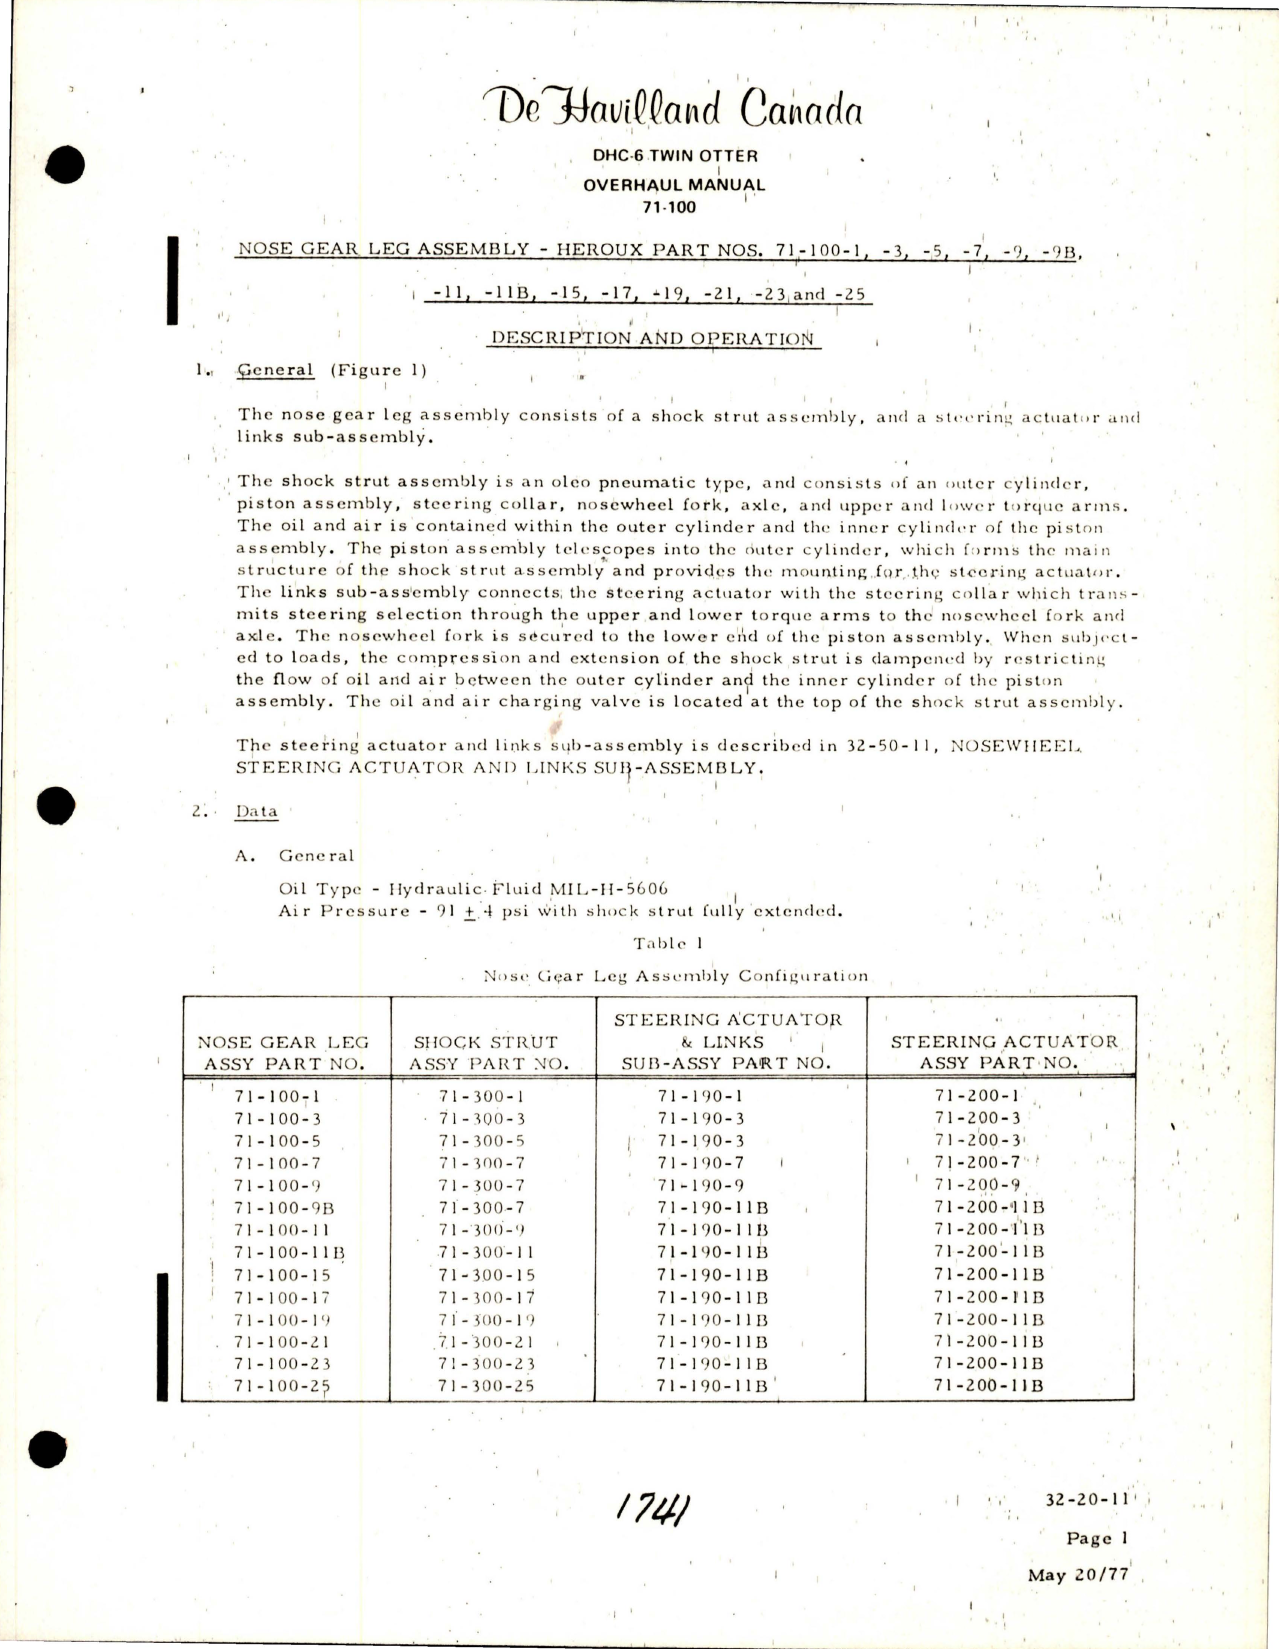 Sample page 7 from AirCorps Library document: Overhaul Manual for DHC-6 Twin Otter Nose Gear Leg Assembly - Part 71-100 